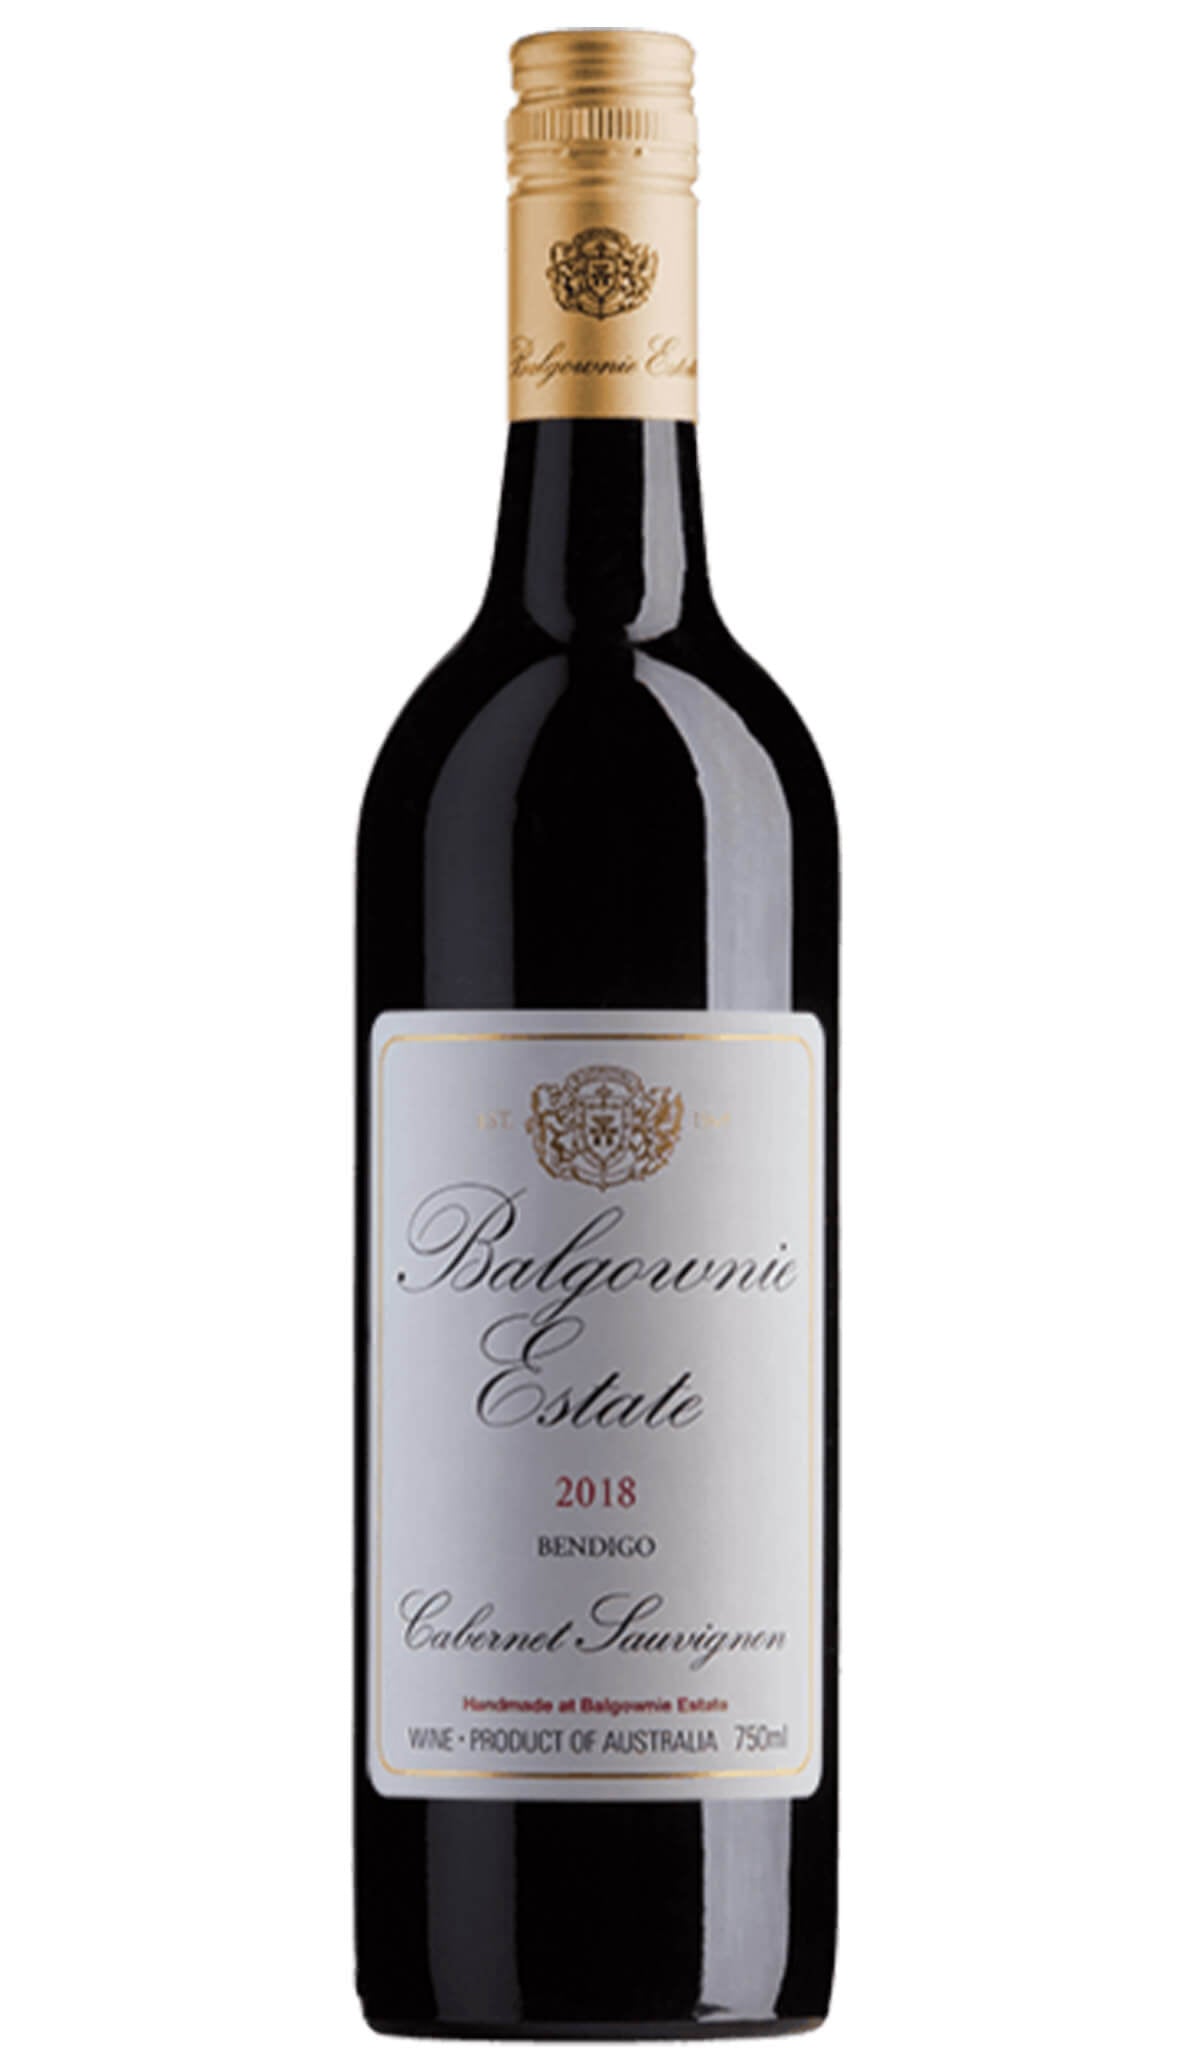 Find out more or buy Balgownie Estate Cabernet Sauvignon 2018 (Bendigo) online at Wine Sellers Direct - Australia’s independent liquor specialists.